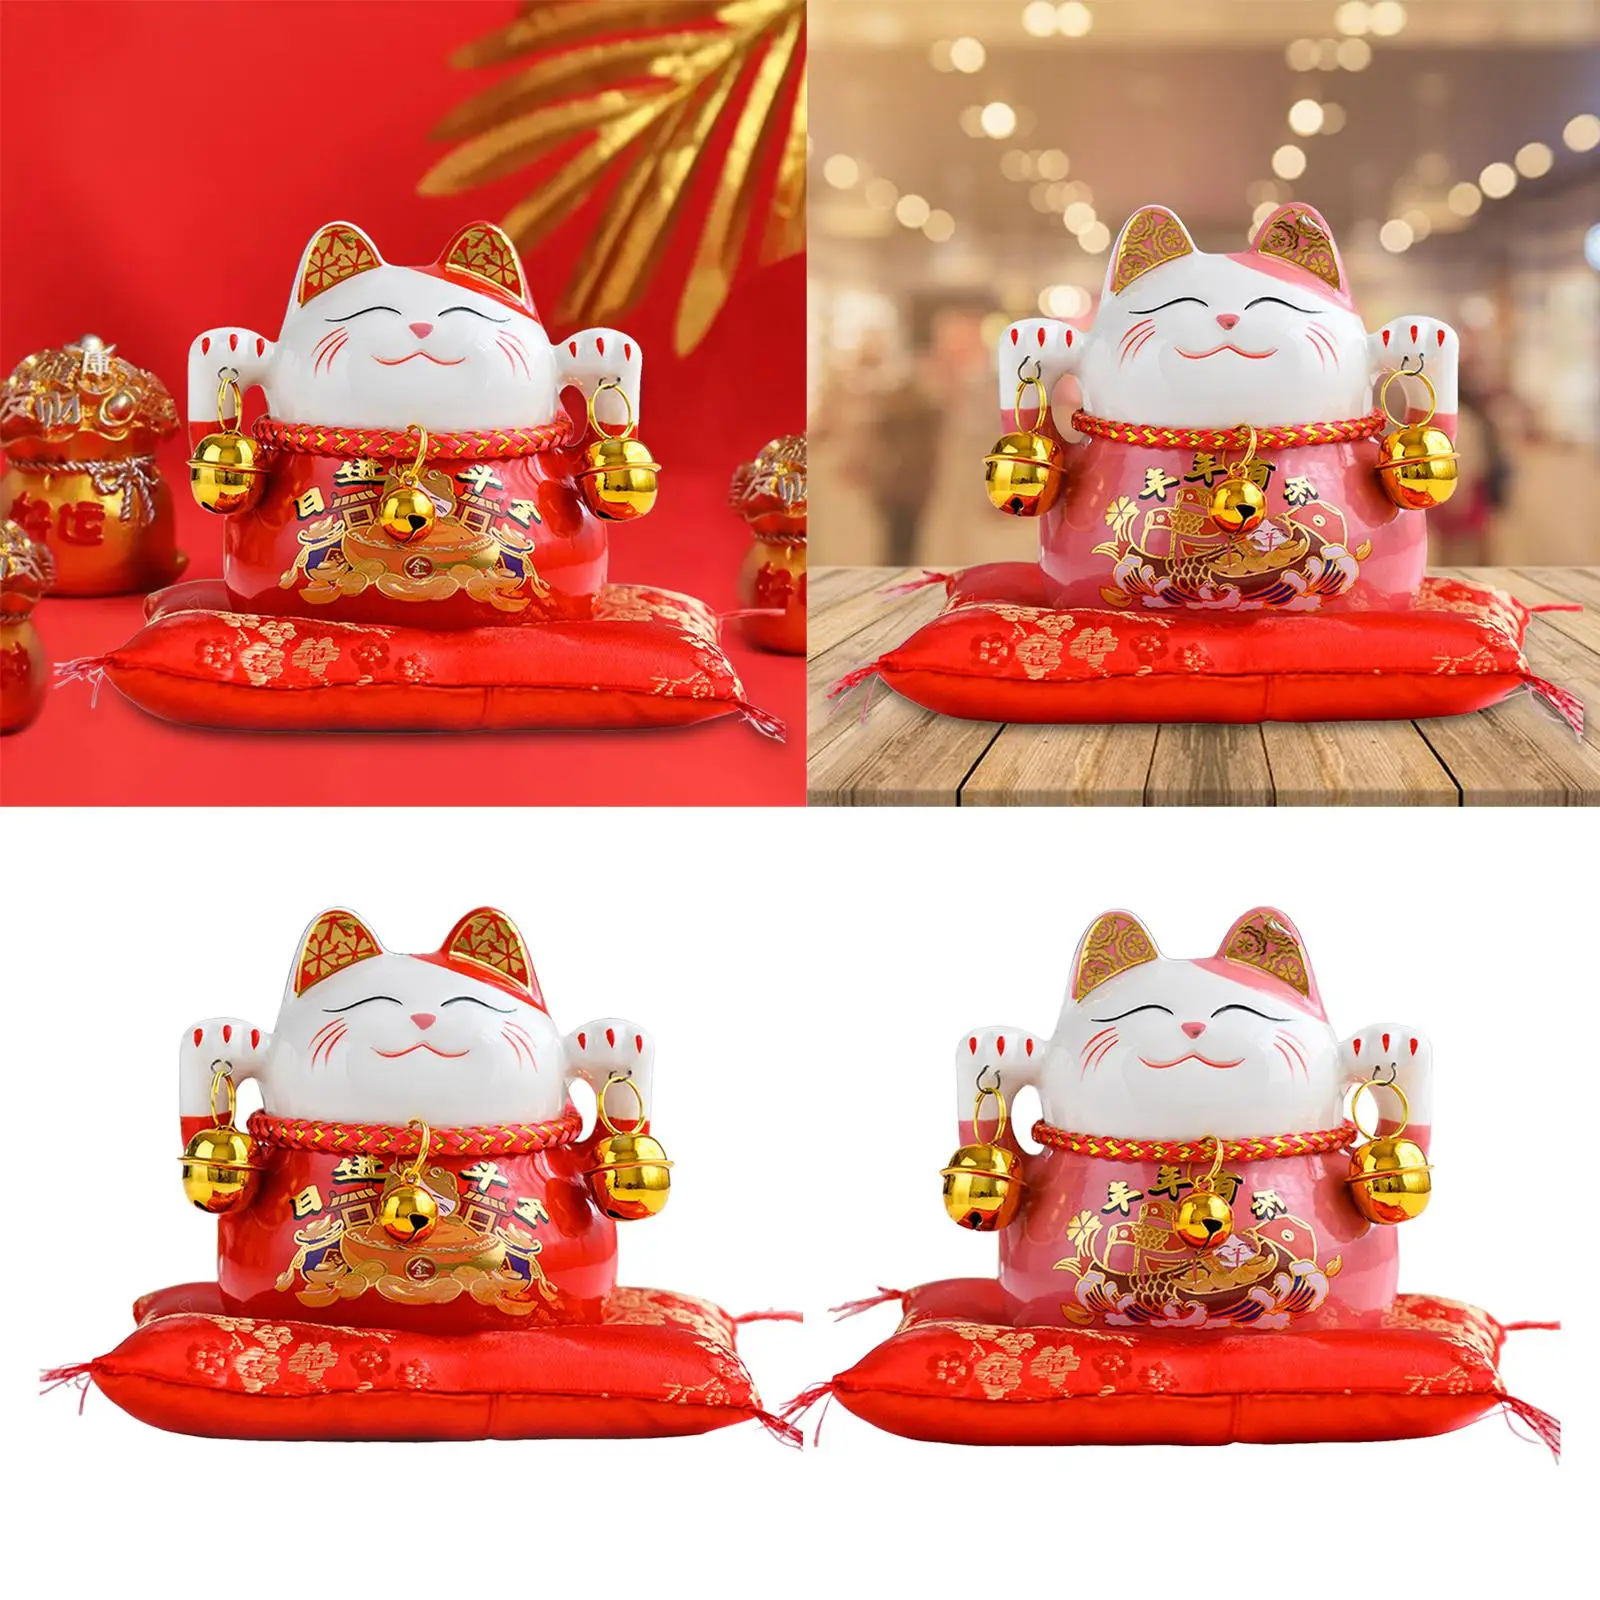 Cute Lucky Cat Money Bank Collection Decorative Craft Kitten Sculpture for Cafe